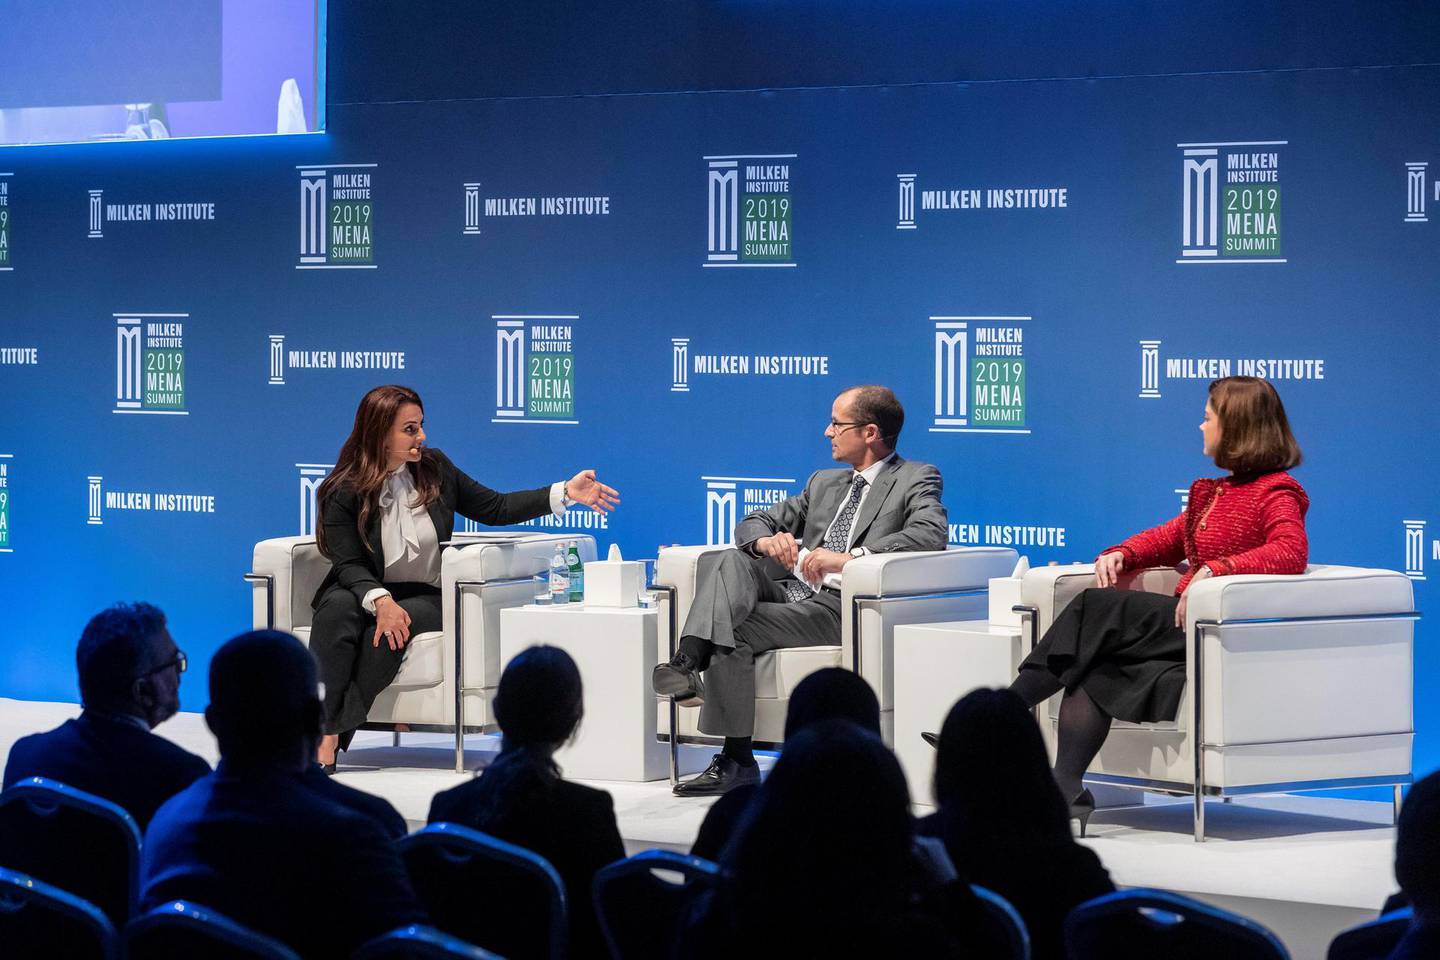 ABU DHABI, UNITED ARAB EMIRATES. 12 FEBRUARY 2019. Panel discussion on Workforce at the Milken Institute 2019 MENA Summit. LtoR: Mina Al-Oraibi, Editor in Chief The National, Jeff Maggioncalda, Coursera and Solveig Nicklos, Abu Dhabi School of Government. (Photo: Antonie Robertson/The National) Journalist: John Dennehy. Section: National.